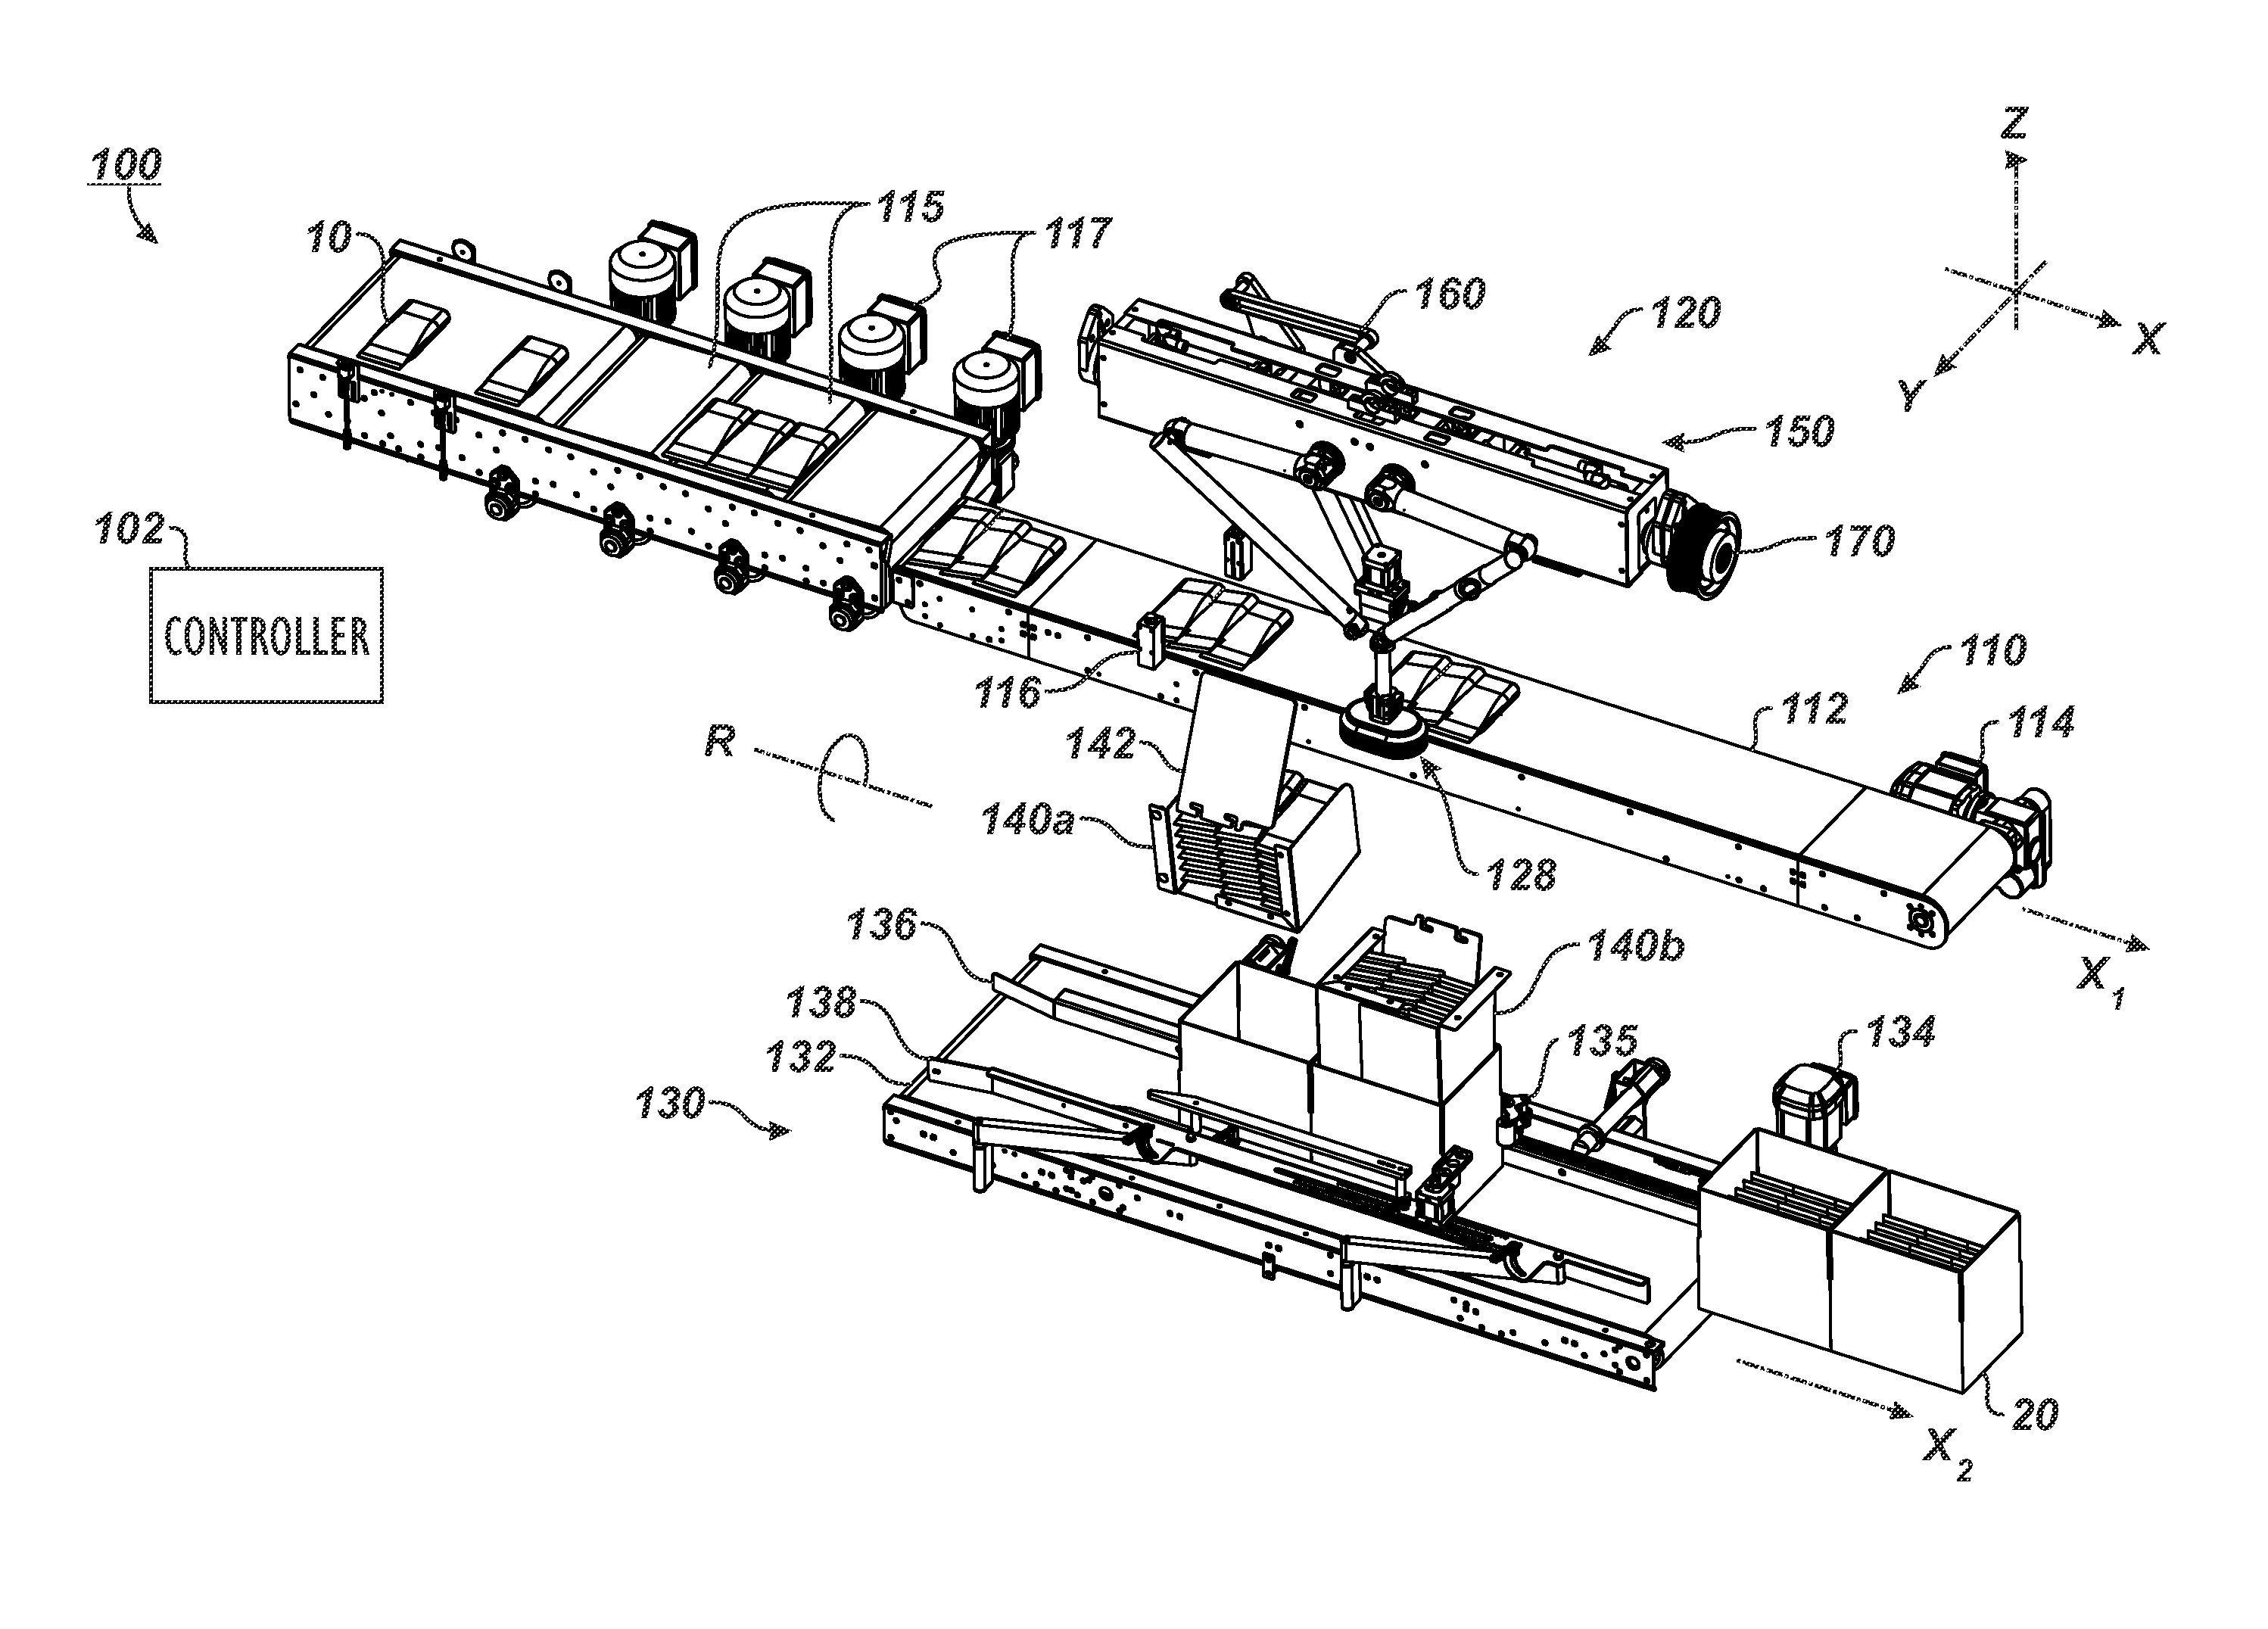 Case packing system having robotic pick and place mechanism and dual dump bins